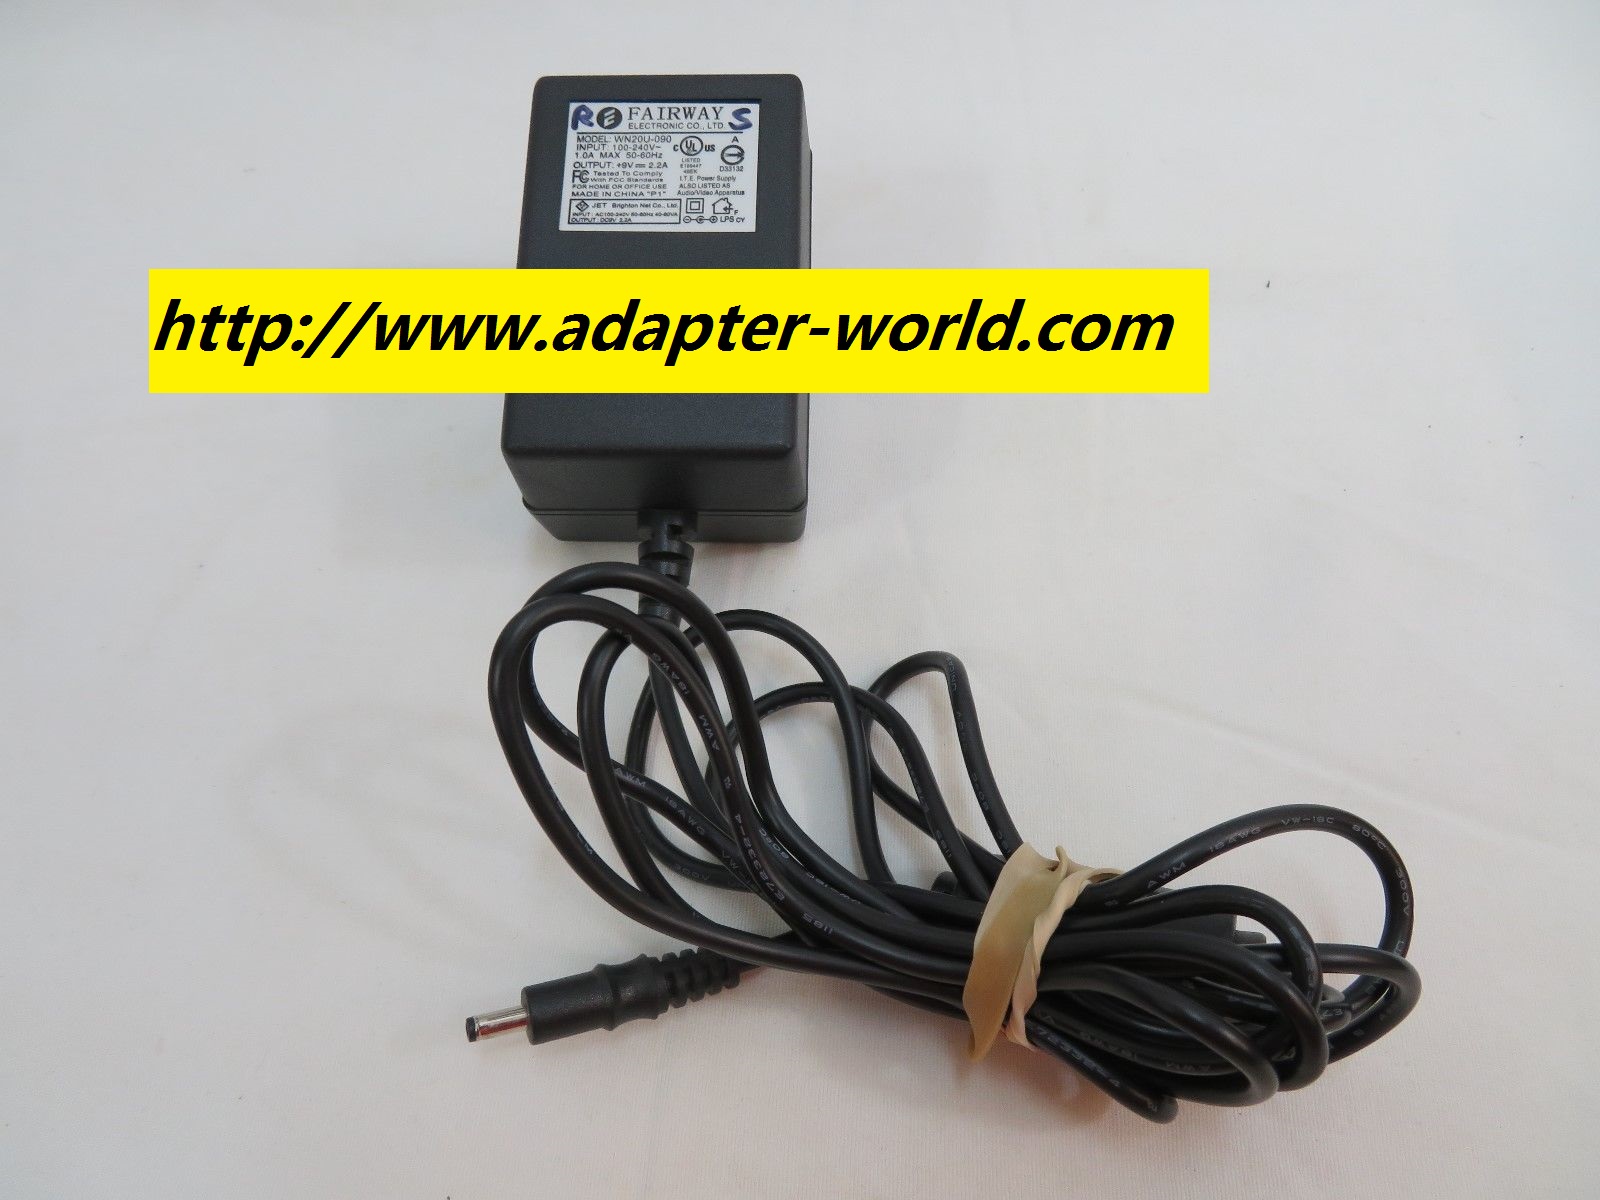 *100% Brand NEW* Fairway Electronics Output 9V 2.2A WN20U-090 AC Power Supply Adapter Free Shipping!